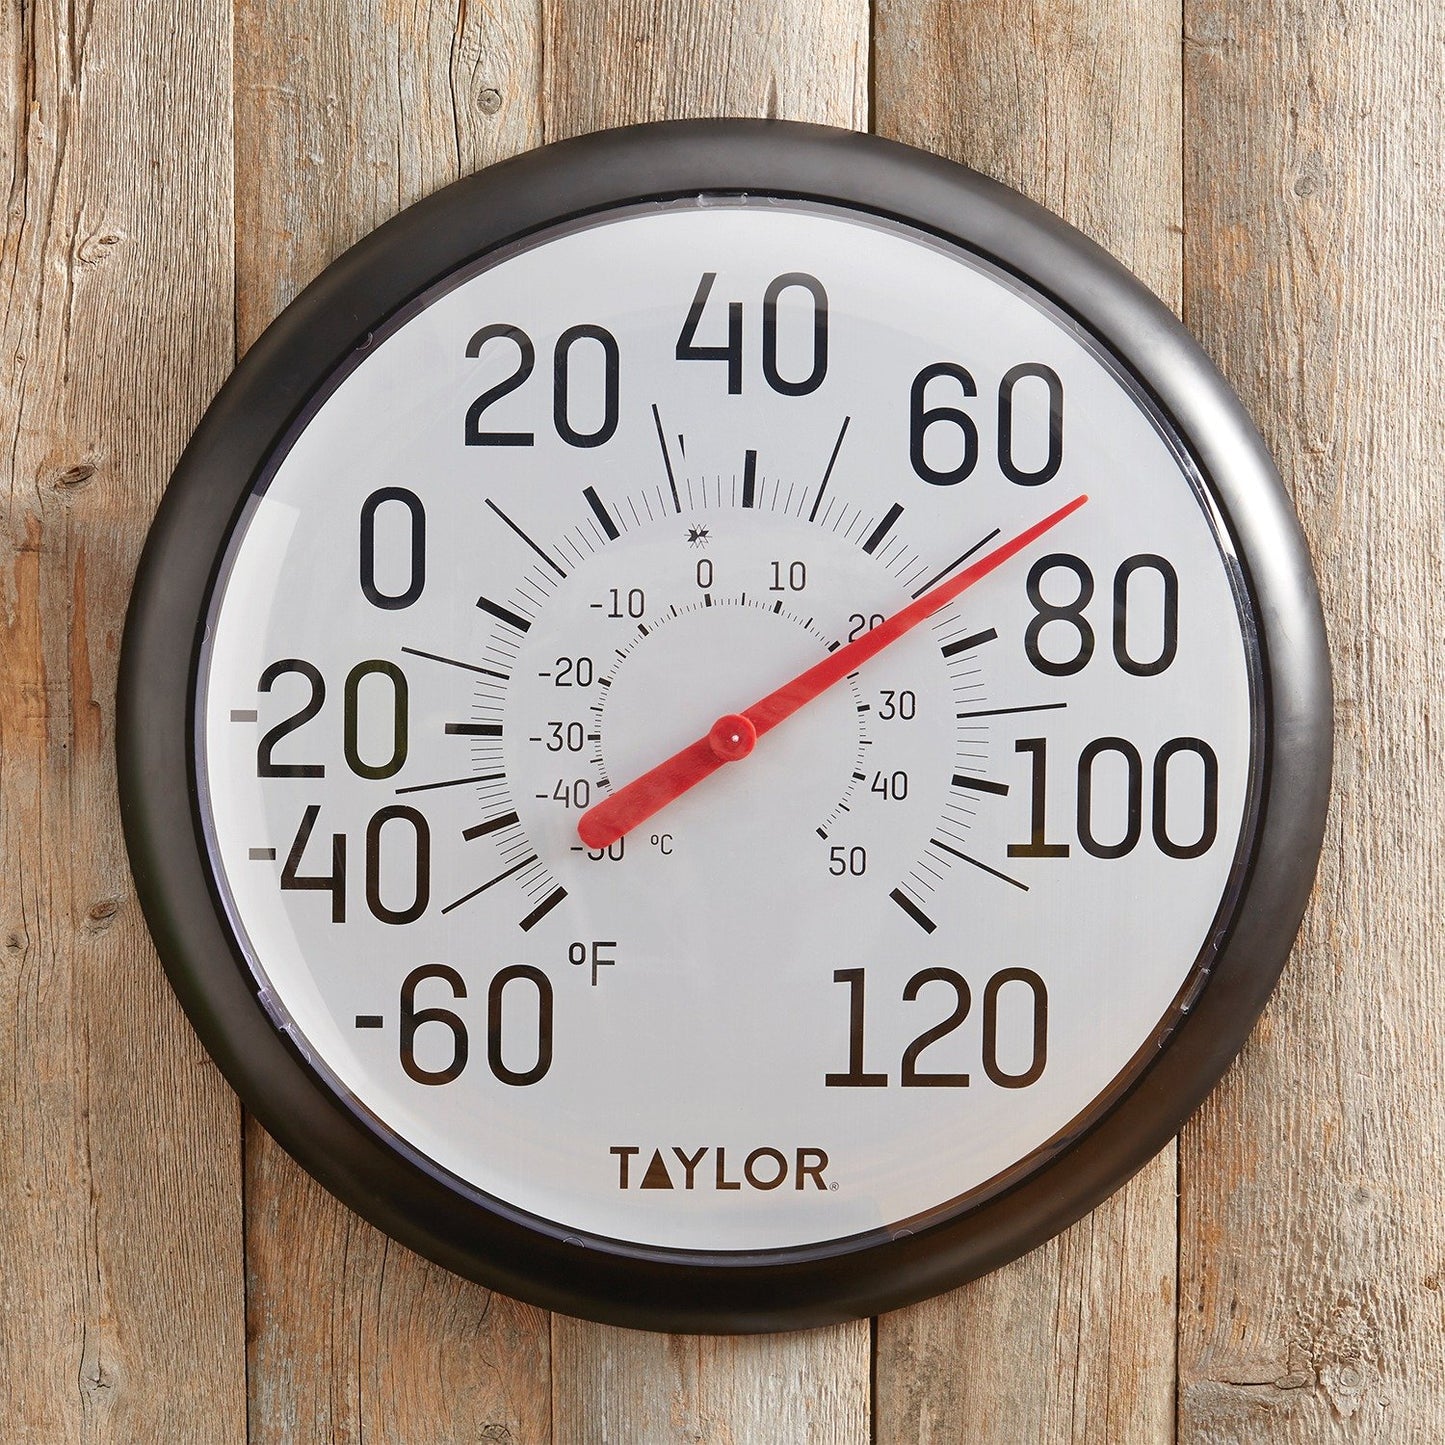 TAYLOR 6700 13.25" Ez Read Dial Thermometer